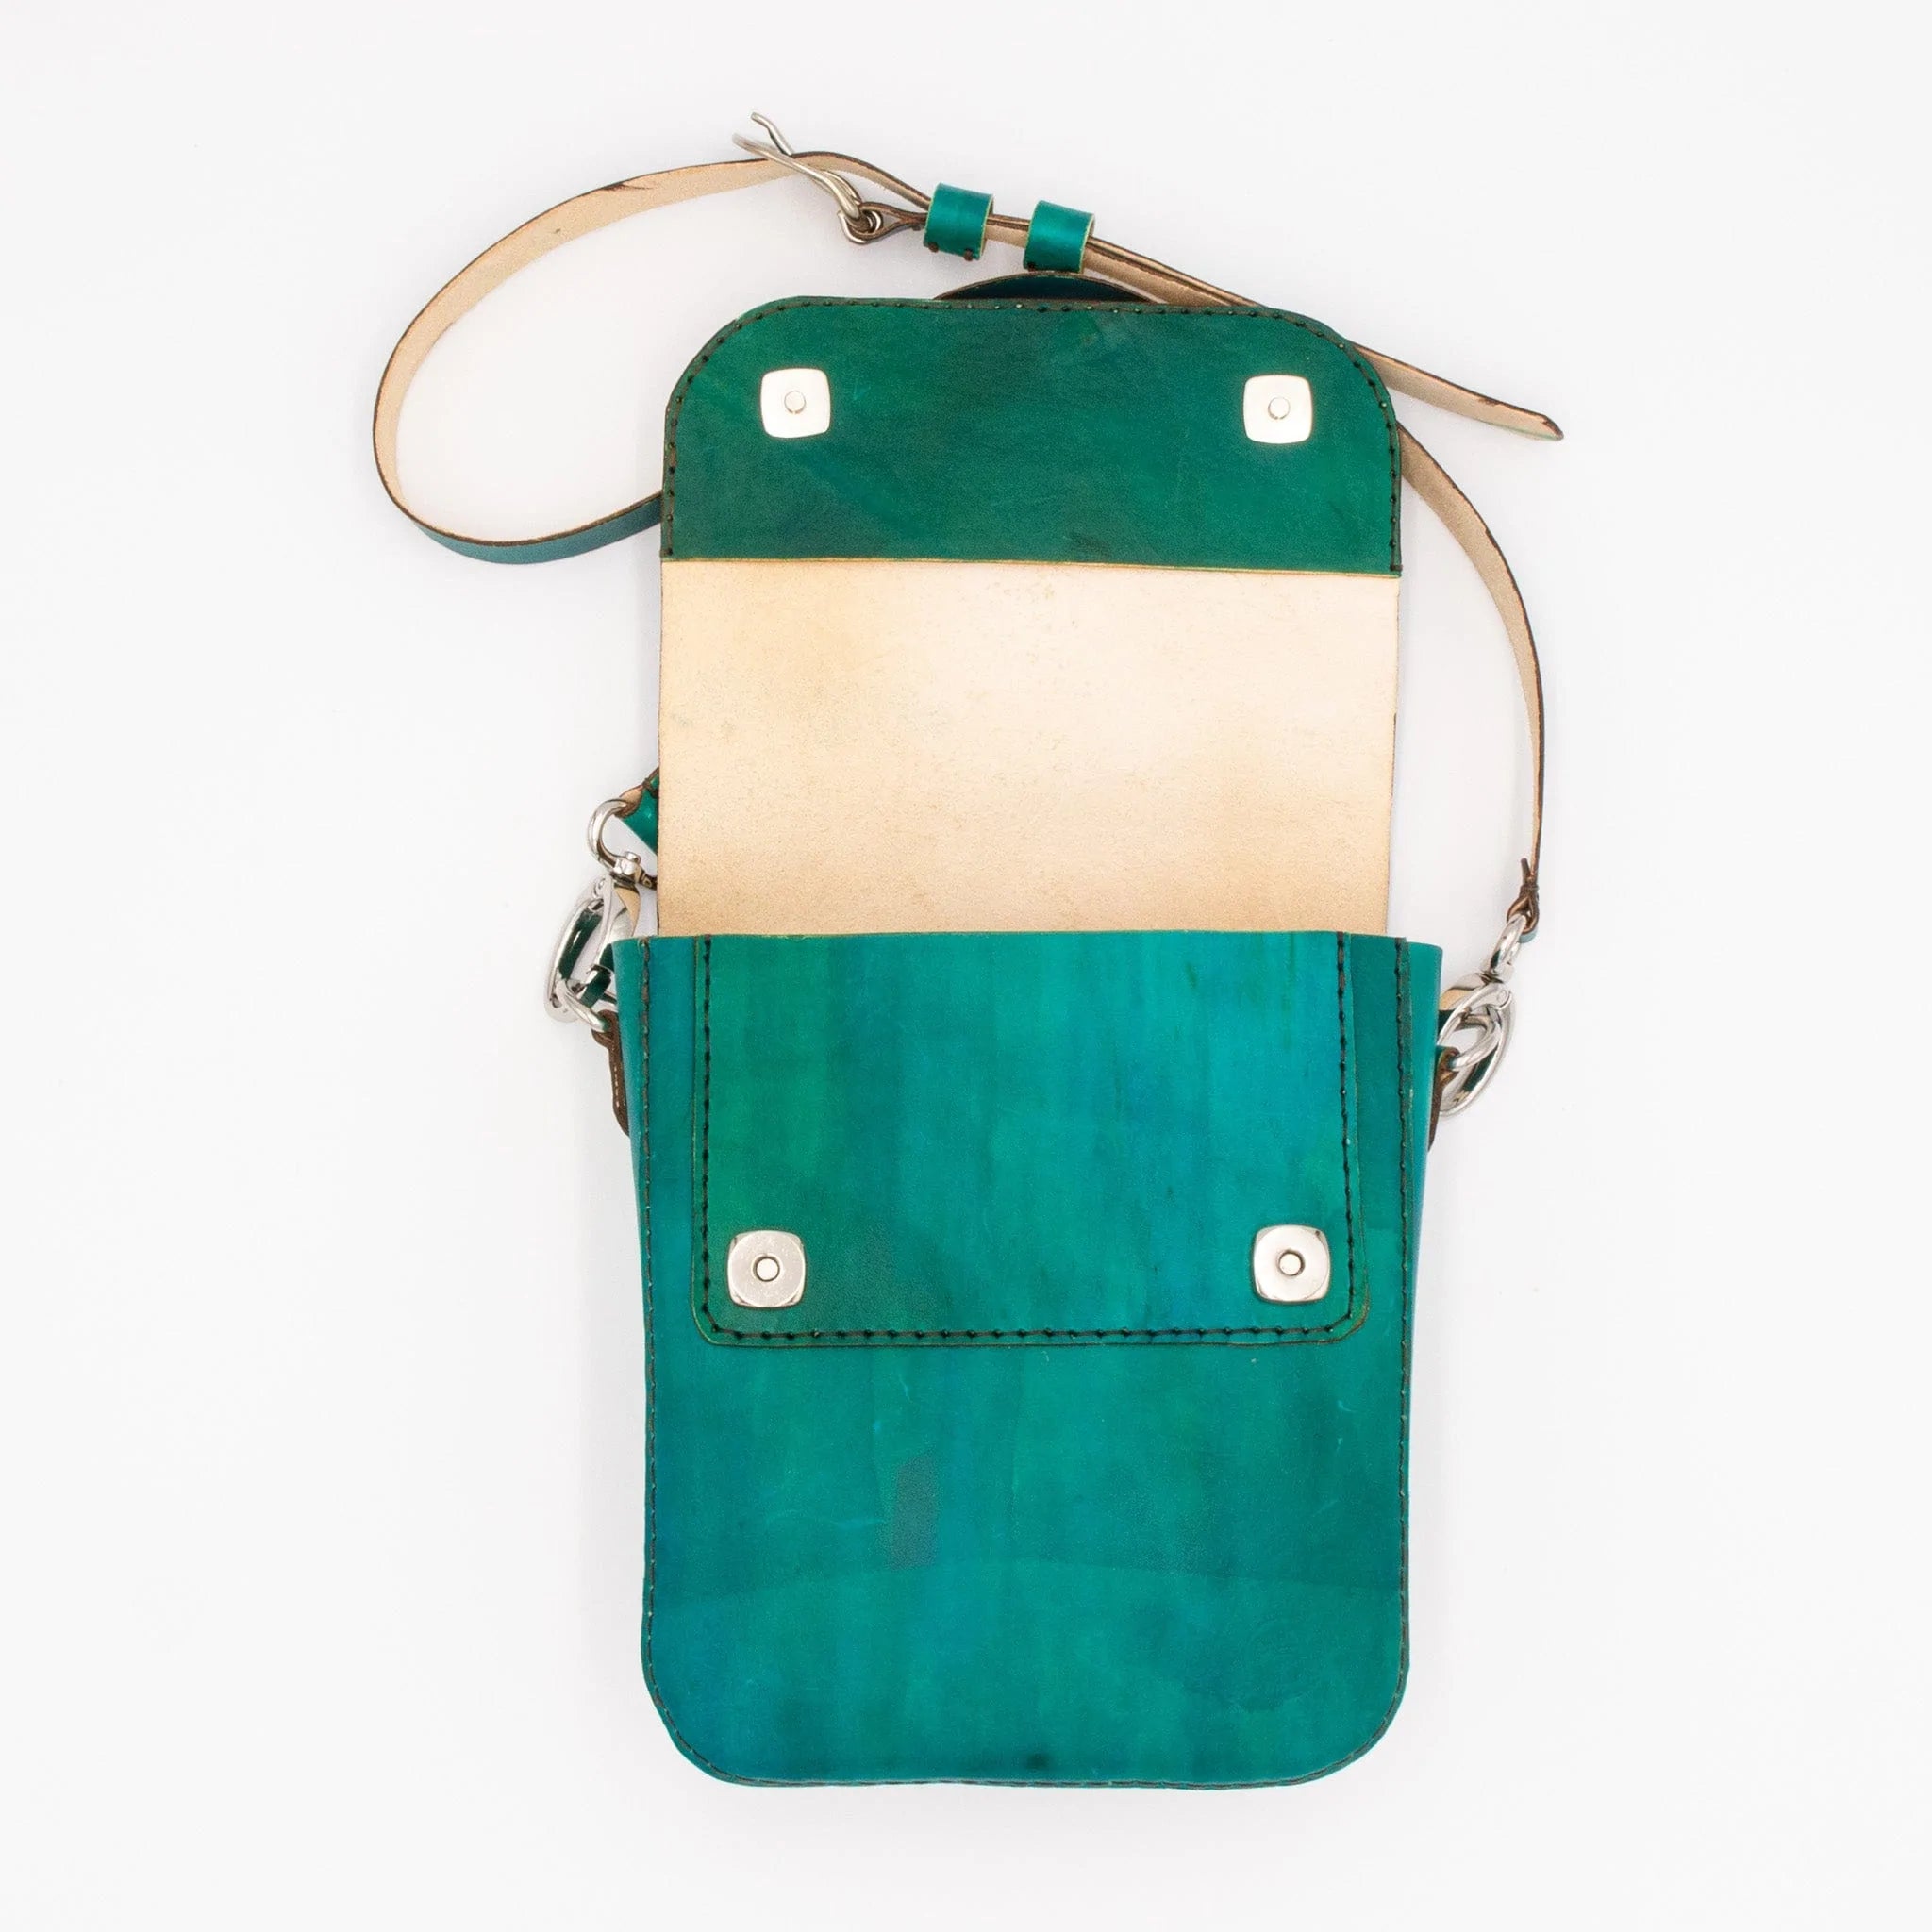 Cheekoo's Handcrafted Genuine Leather Small Crossbody Messenger Bag - Forest Green